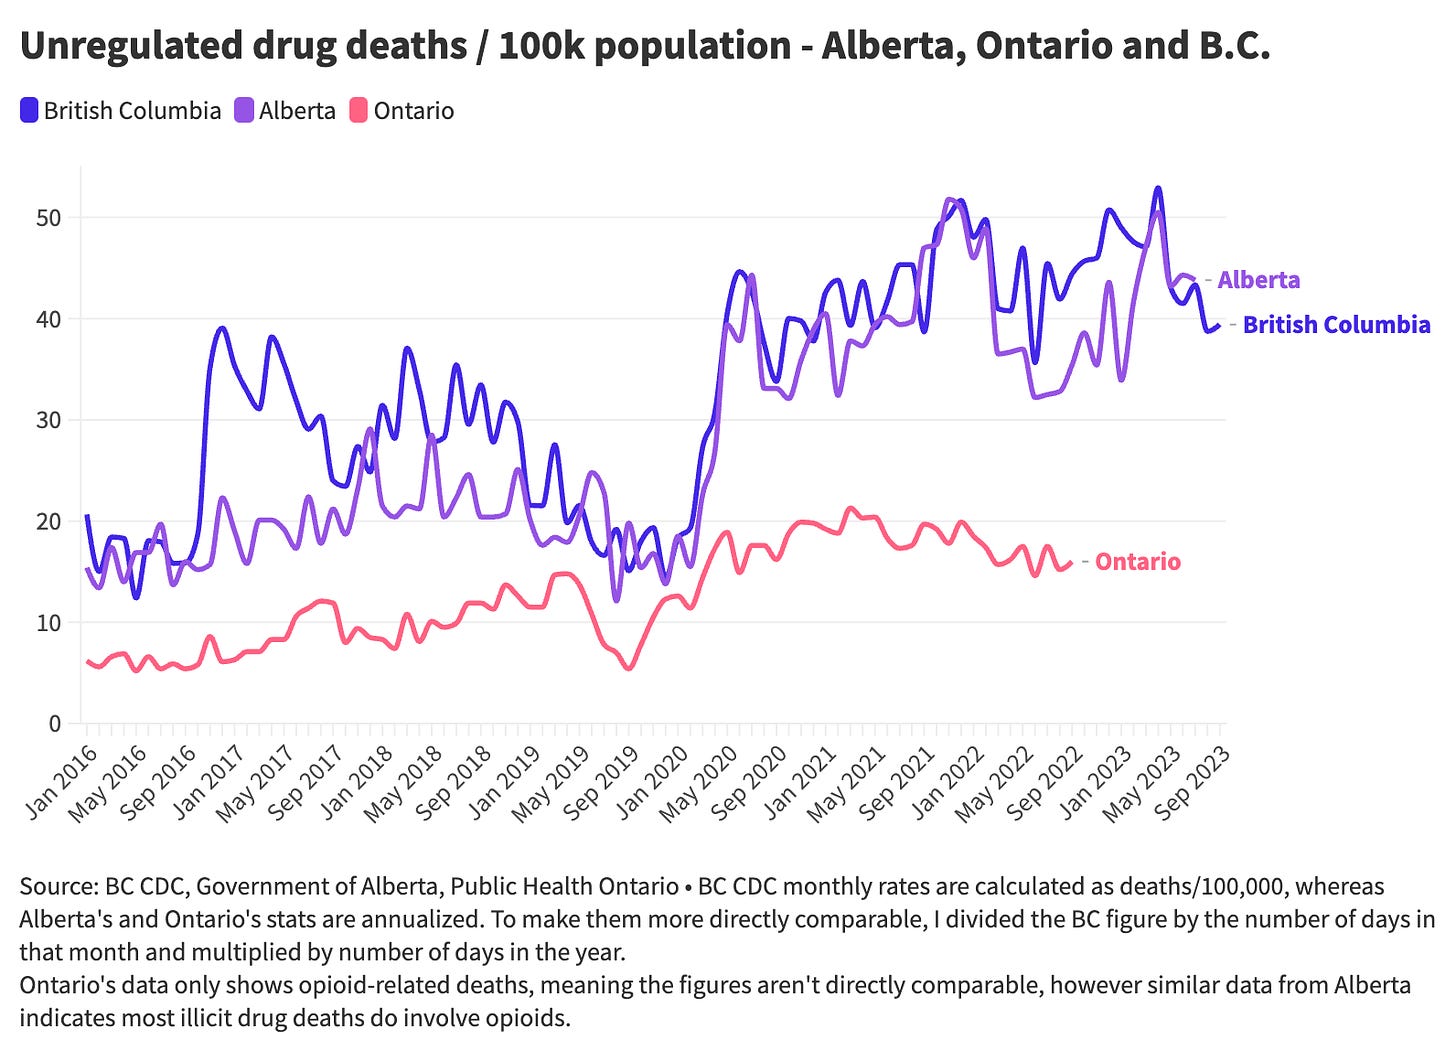 A graph shoting unregulated drug deaths per 100,000 population in Alberta, Ontario and BC. The graph shows BC and Alberta virtually in lockstep with one another since 2019, after both rose immensely to around 40 deaths per 100k and even rising at times since then to 50.